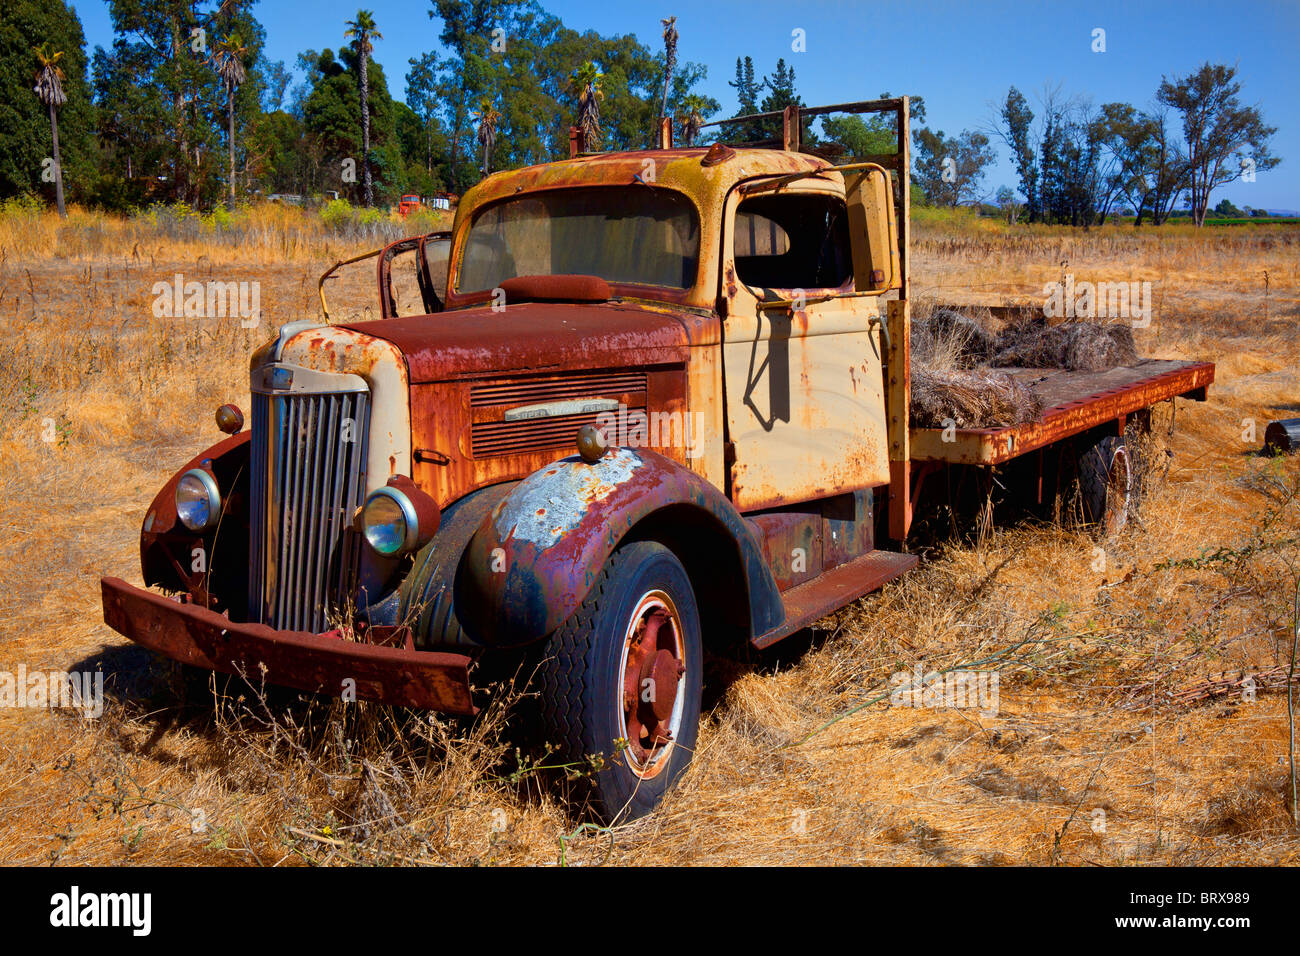 Old rusty flatbed truck in field, California Stock Photo